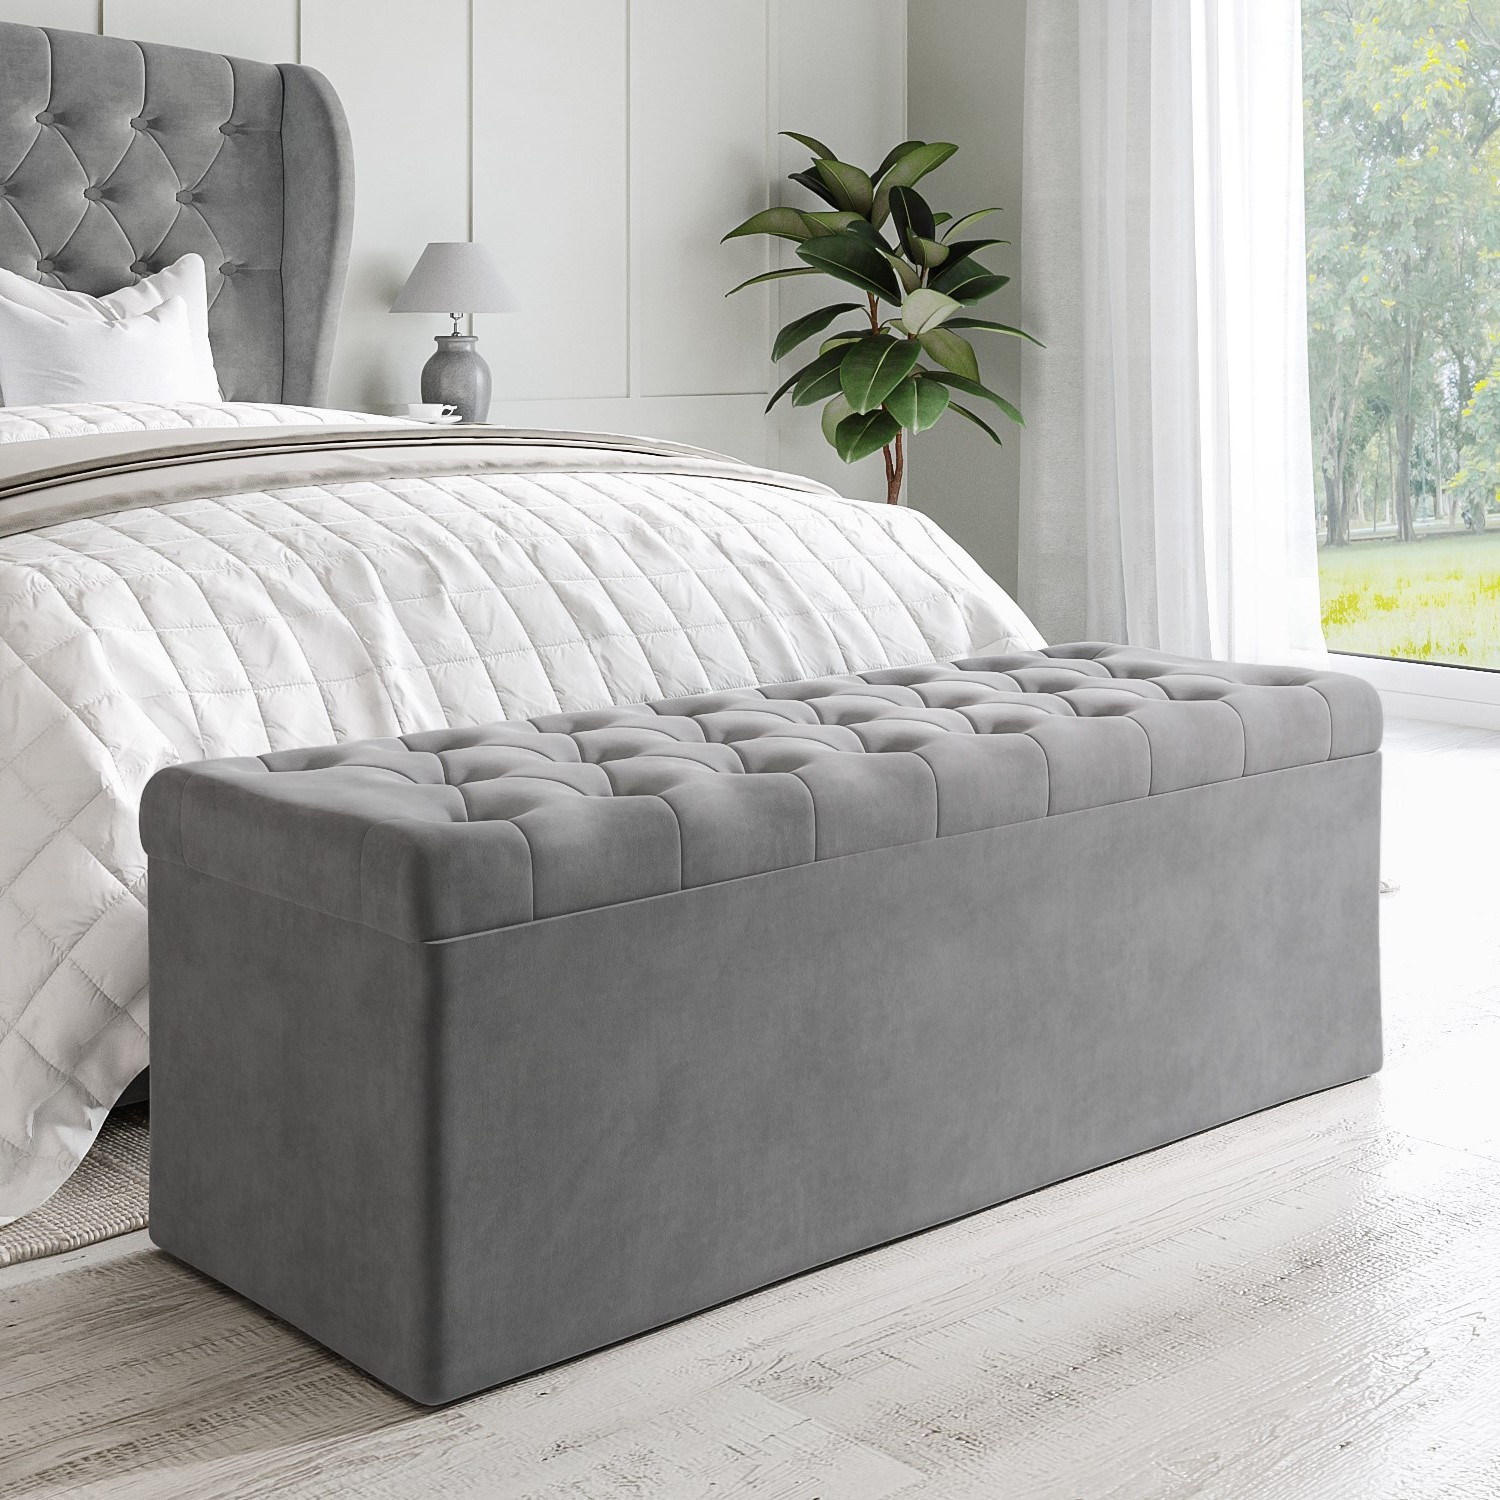 Read more about Grey velvet king size ottoman bed with matching blanket box